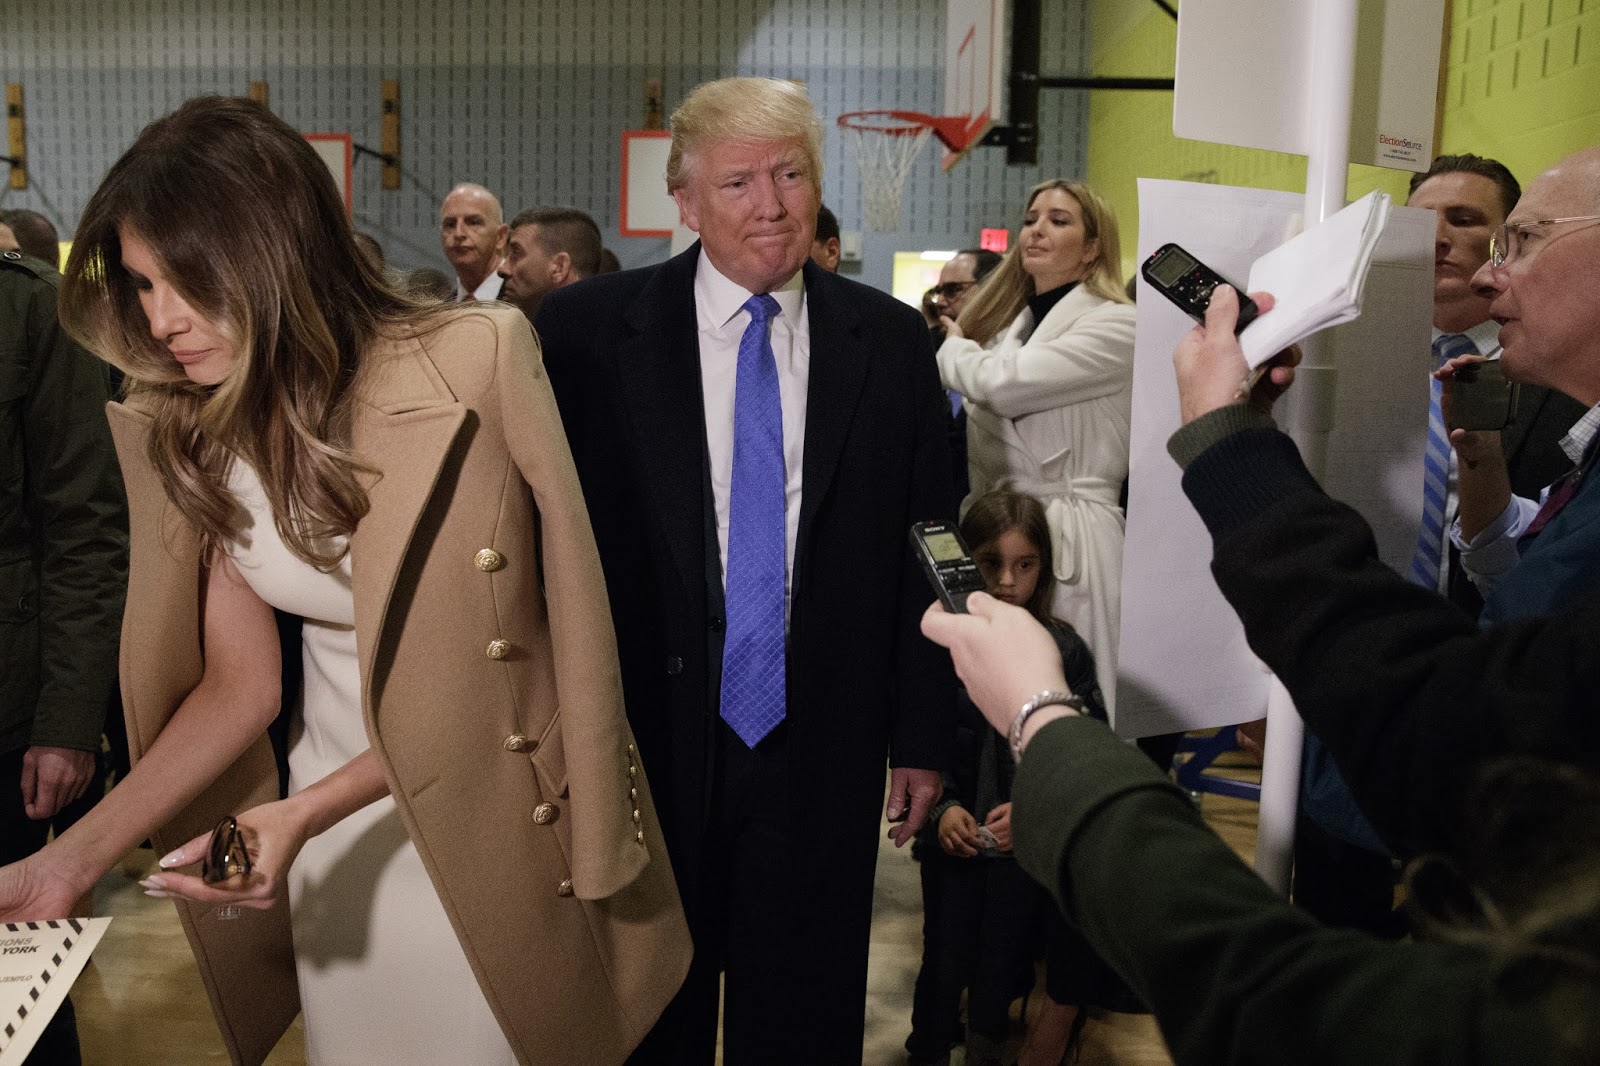 Republican presidential candidate Donald Trump, accompanied by his wife Melania, talks with reporters as he waits in line to vote at PS-59, Tuesday, Nov. 8, 2016, in New York. (AP Photo/ Evan Vucci) |